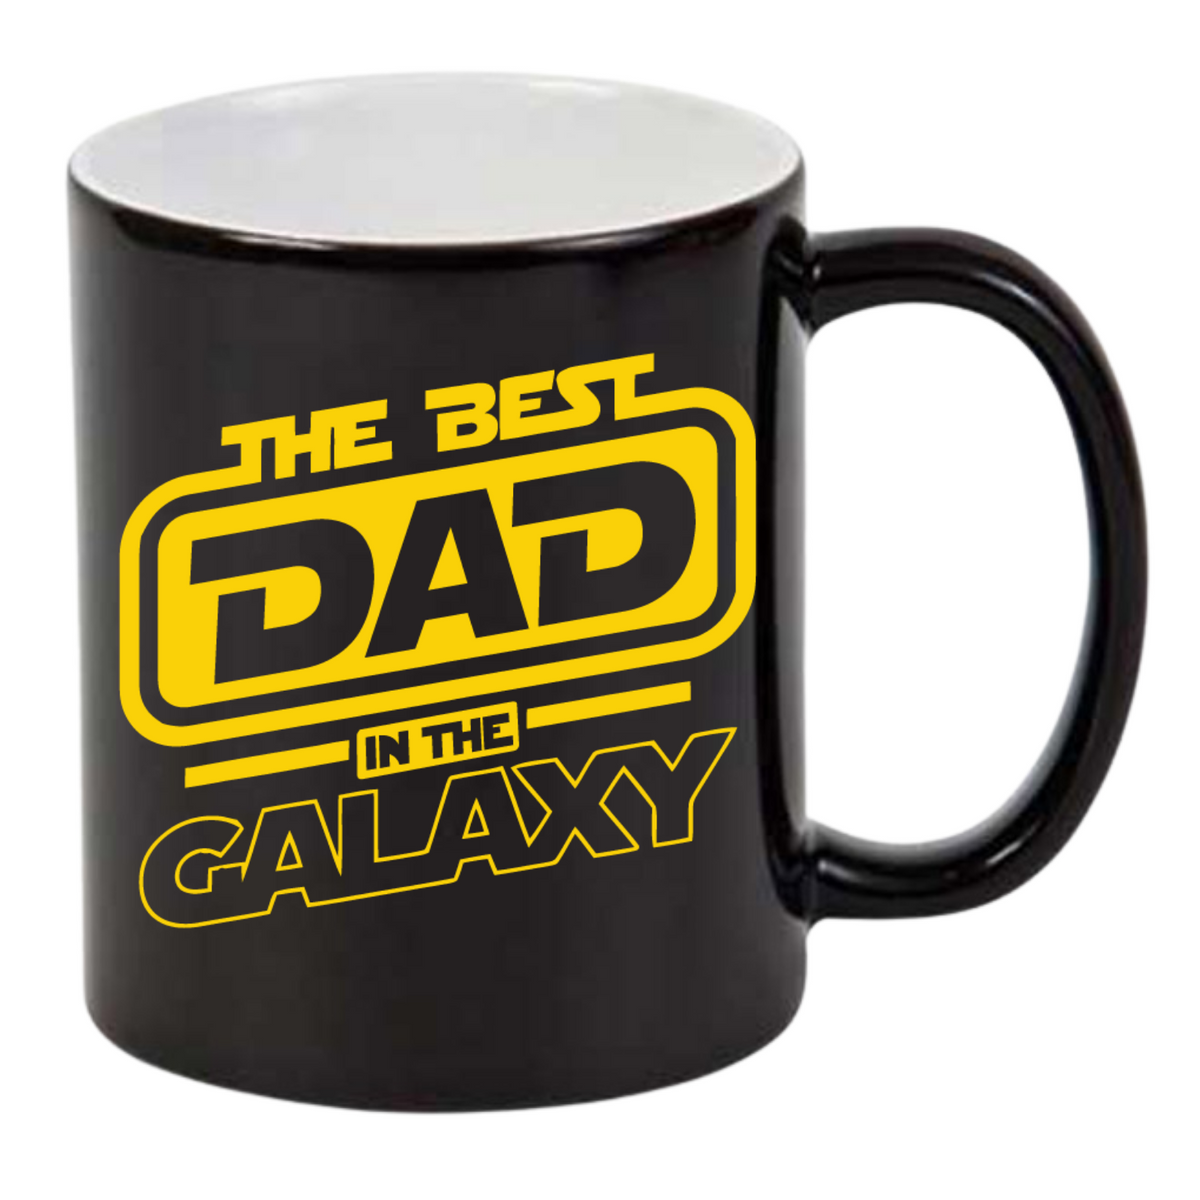 BEST DAD IN THE GALAXY - TAZA